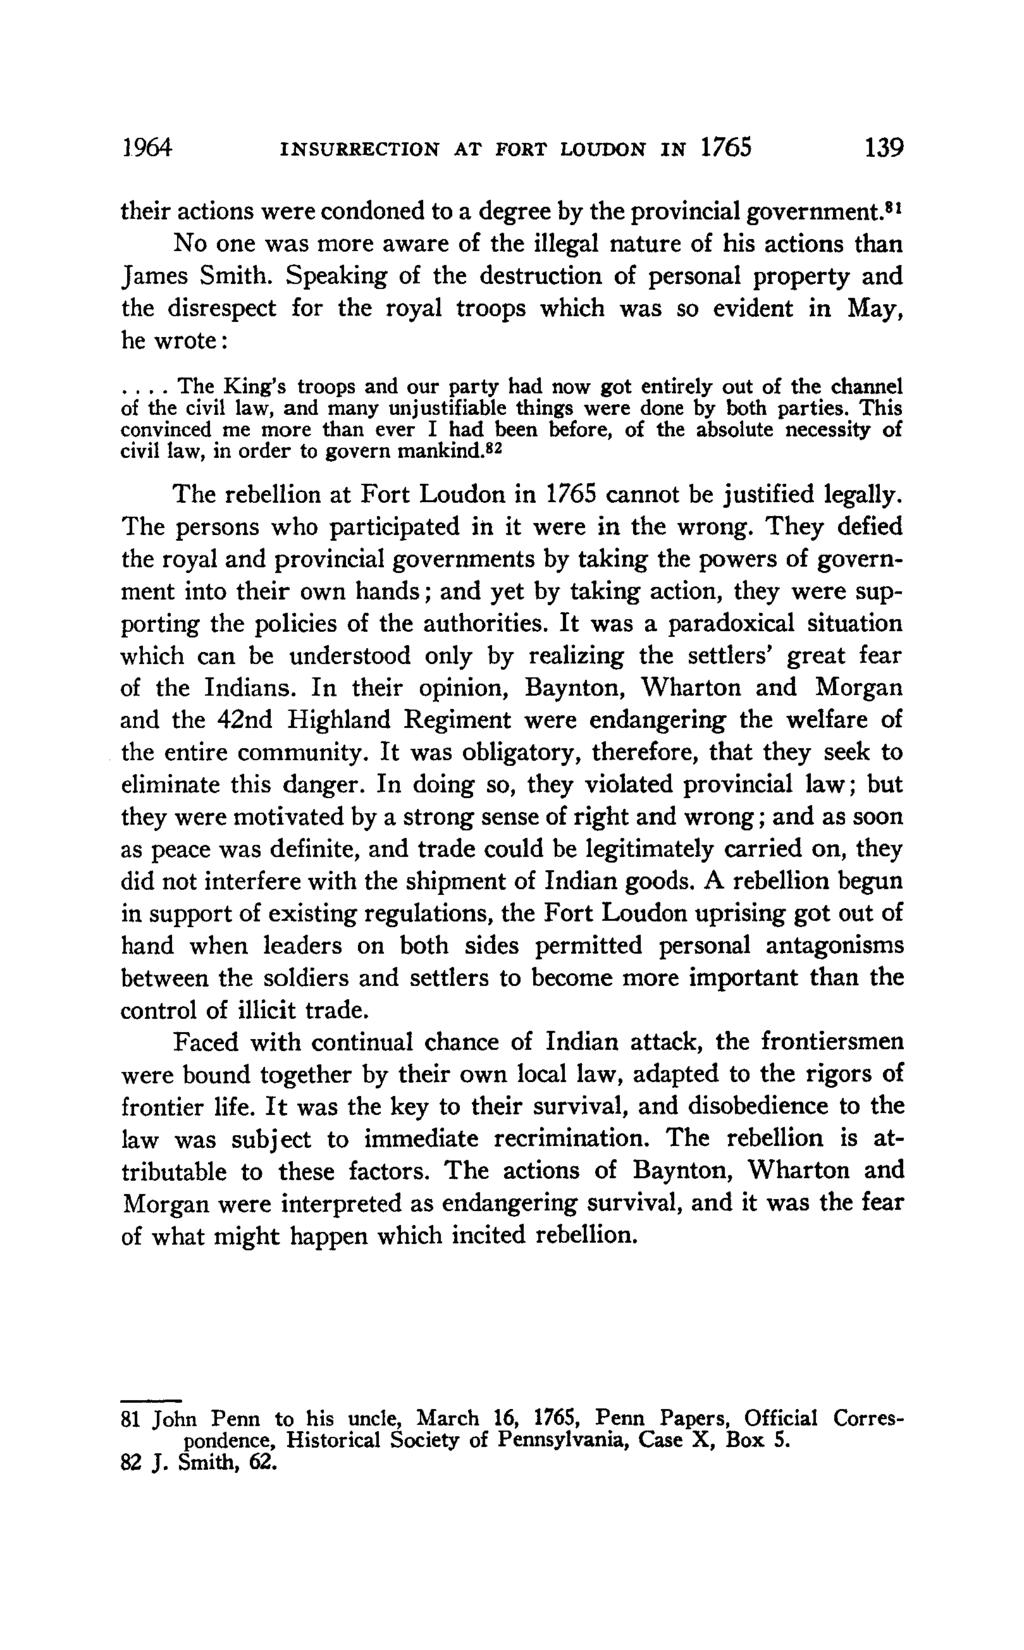 1964 INSURRECTION AT FORT LOUDON IN 1765 139 their actions were condoned to a degree by the provincial government. 81 No one was more aware of the illegal nature of his actions than James Smith.